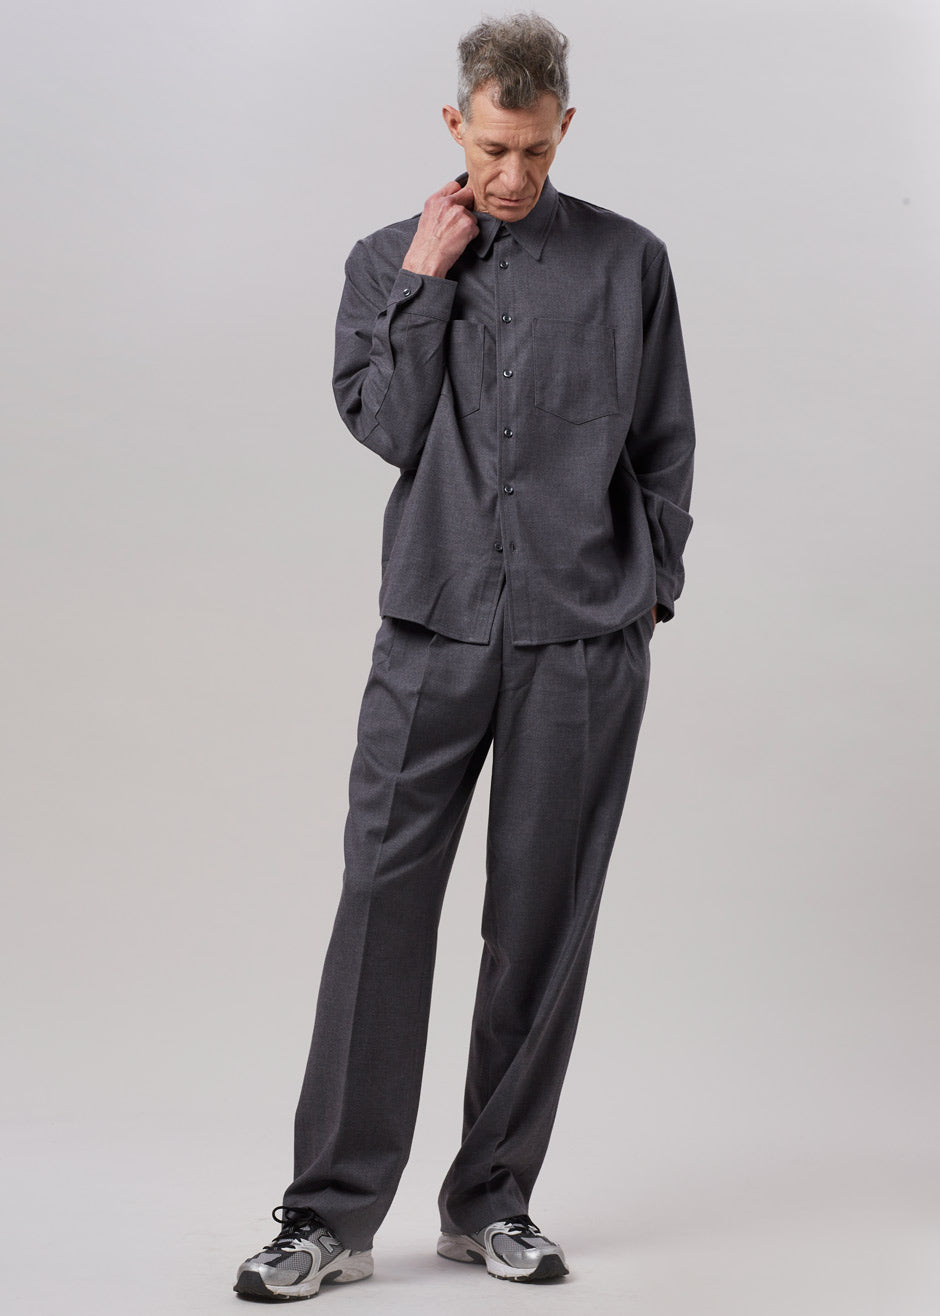 Heith Flanelle Suit Pants - Charcoal - 5